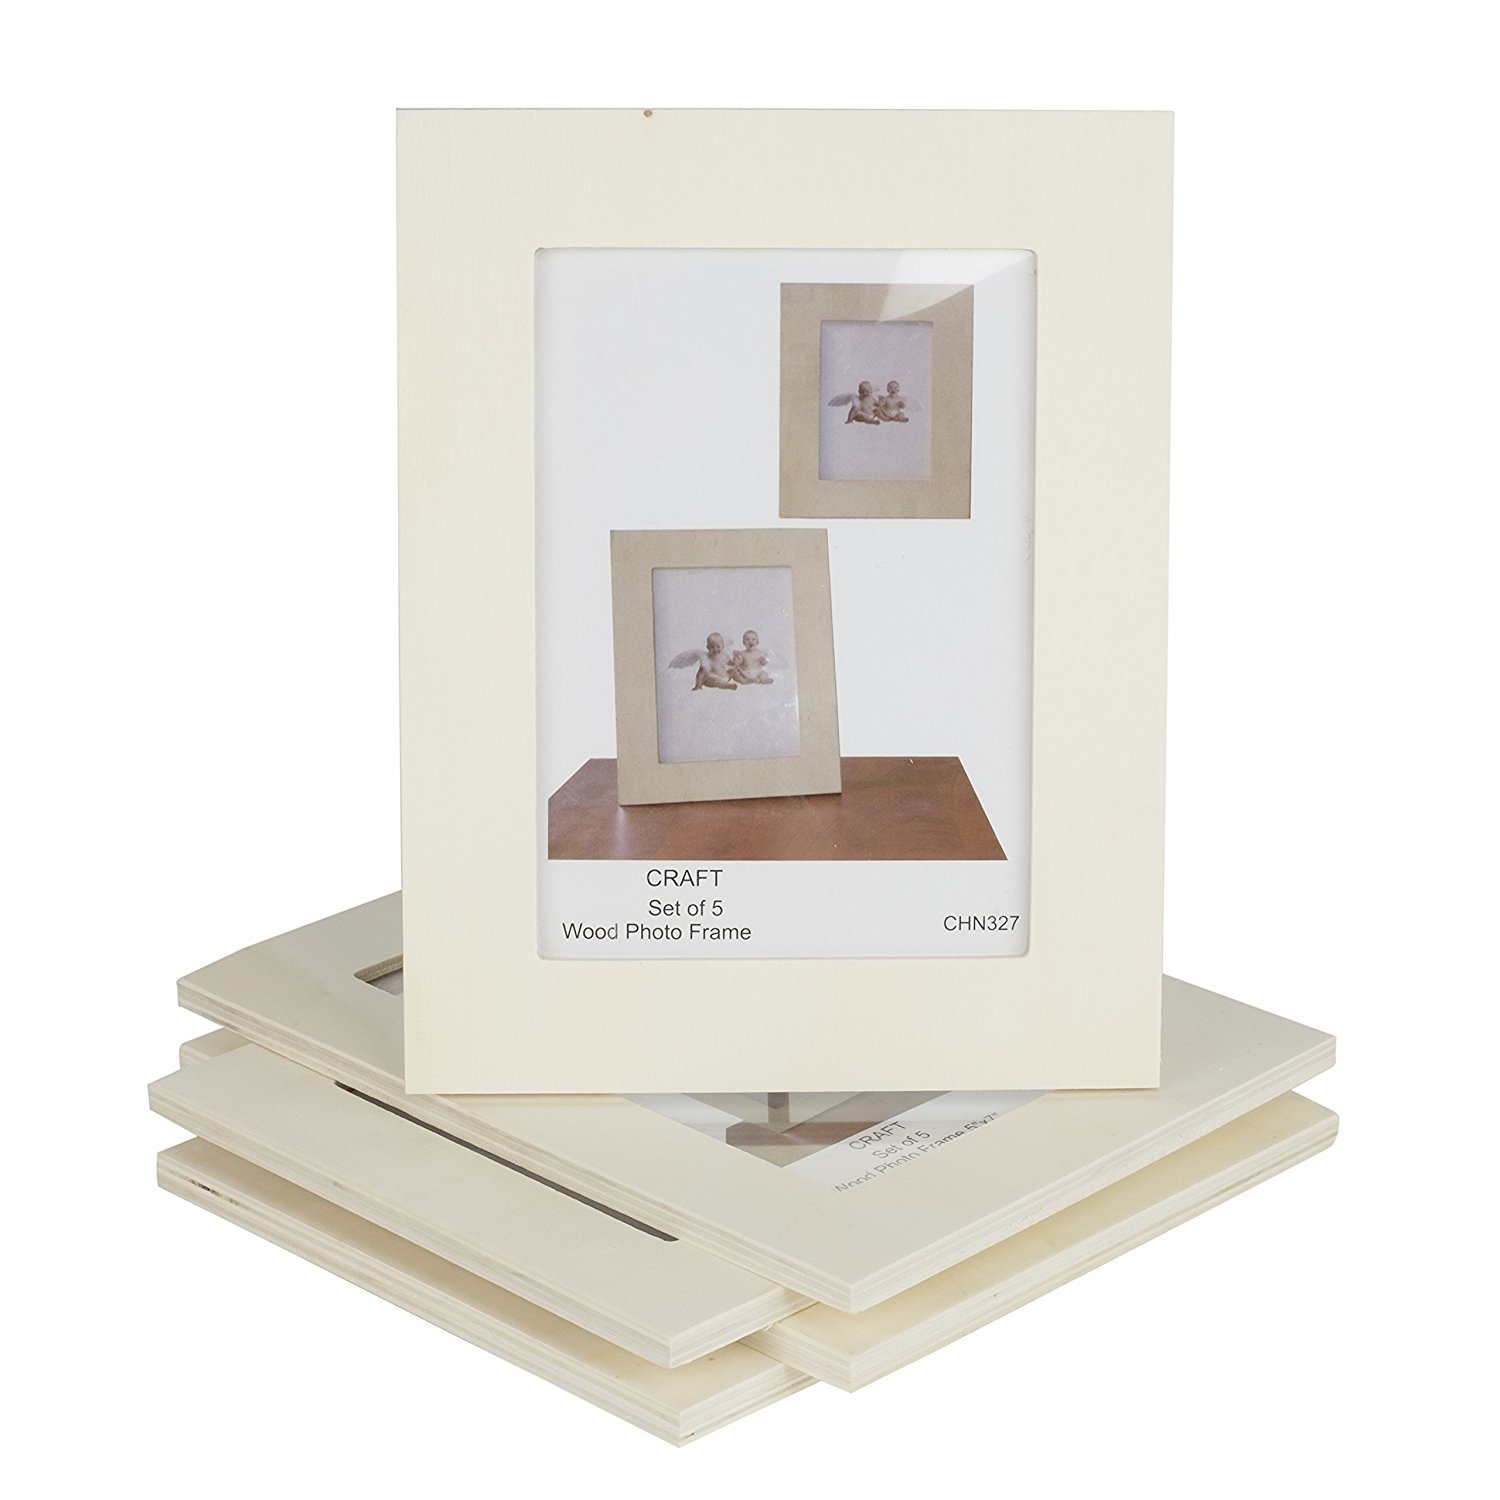 Unfinished Solid Wood Photo Picture Frames 4x6 Inch Ready to Paint for DIY Projects Set of 5